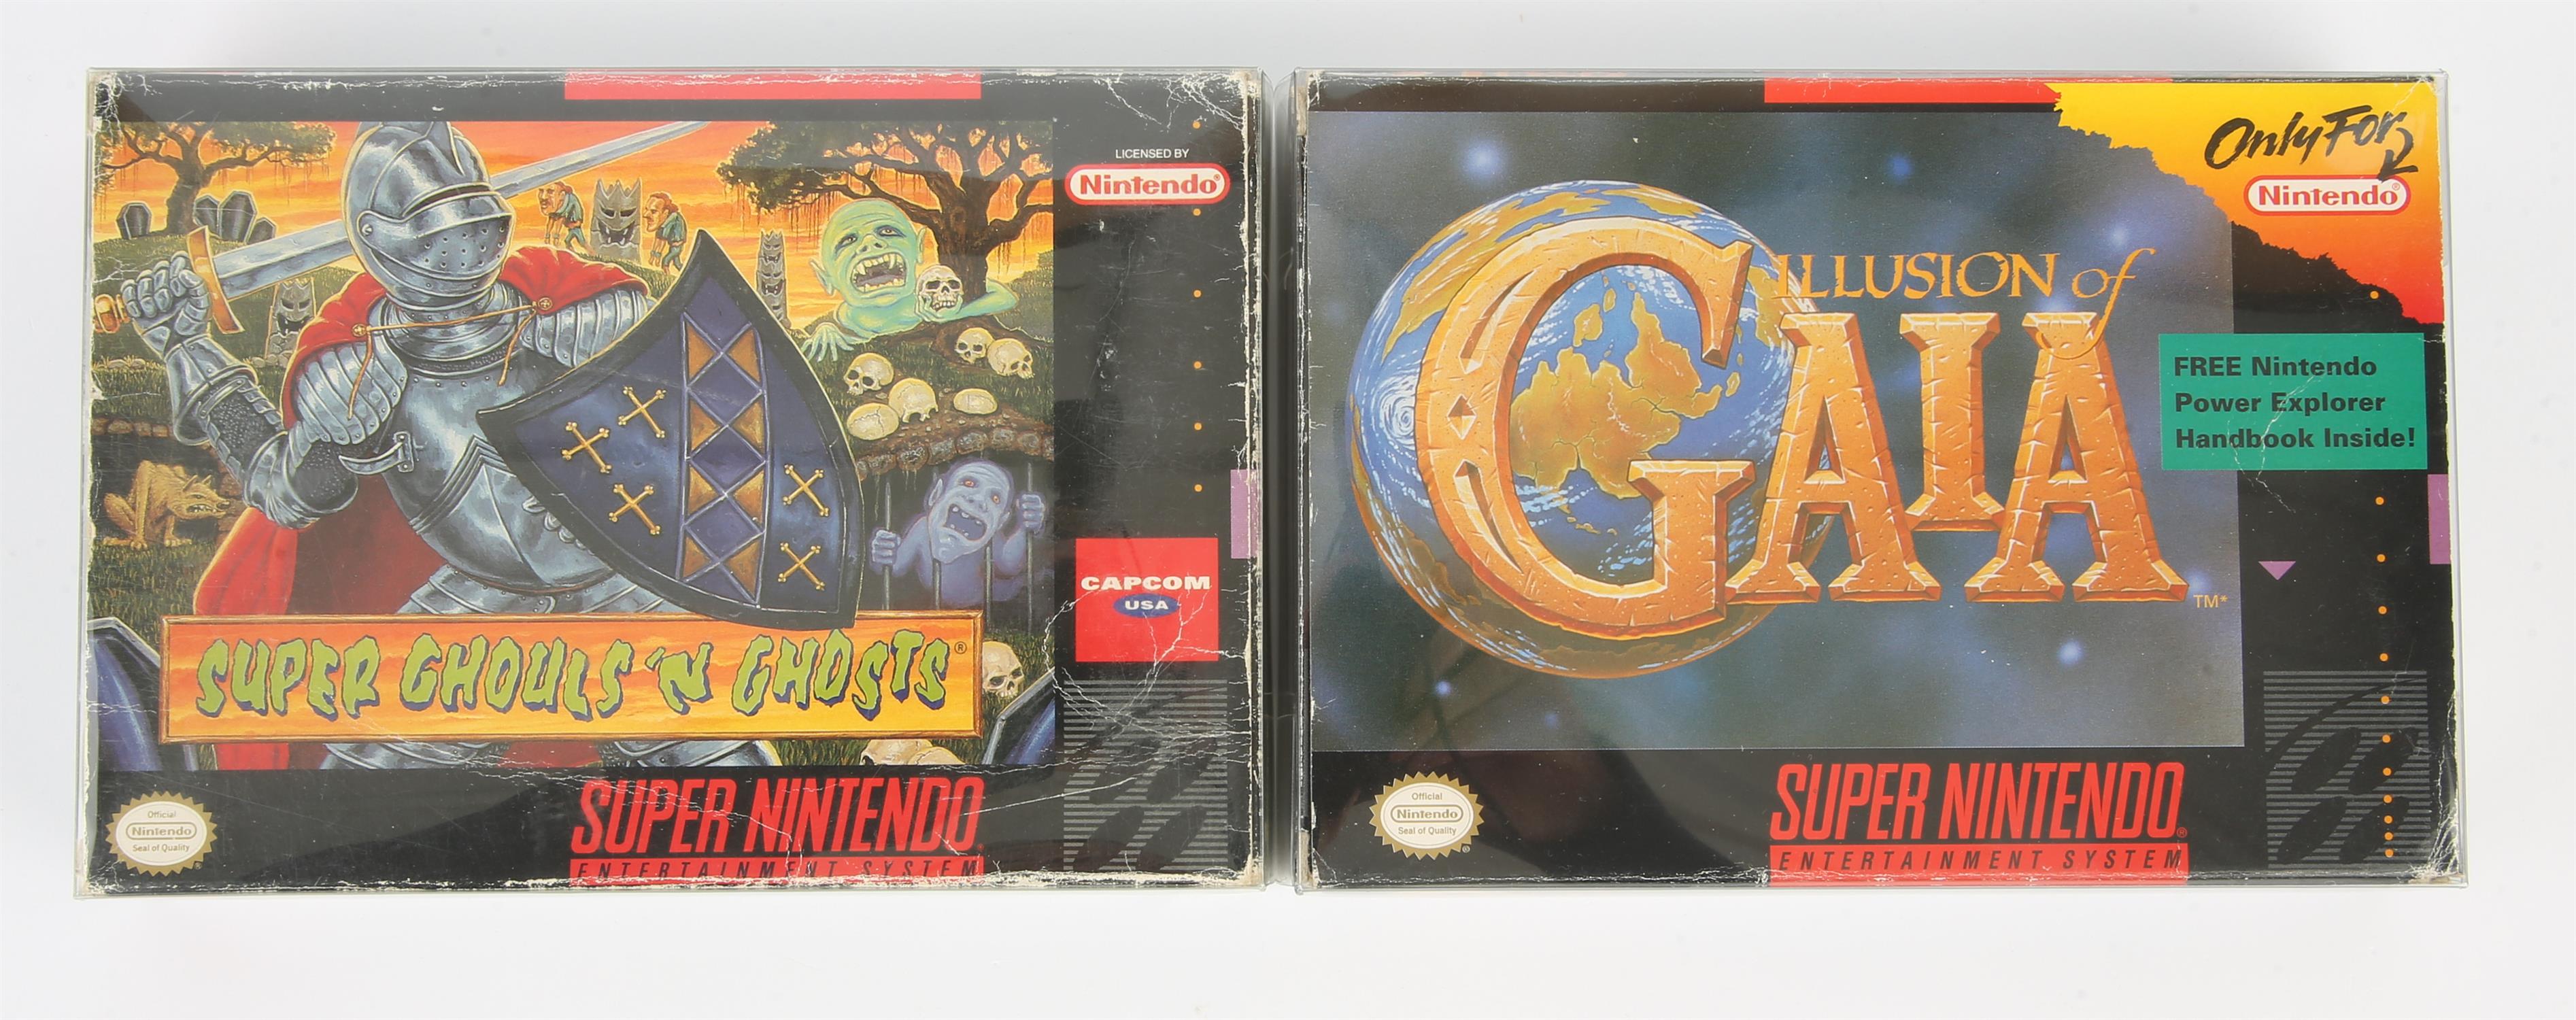 Super Nintendo (SNES) fantasy bundle Includes: Illusion of Gaia and Super Ghouls 'N Ghosts